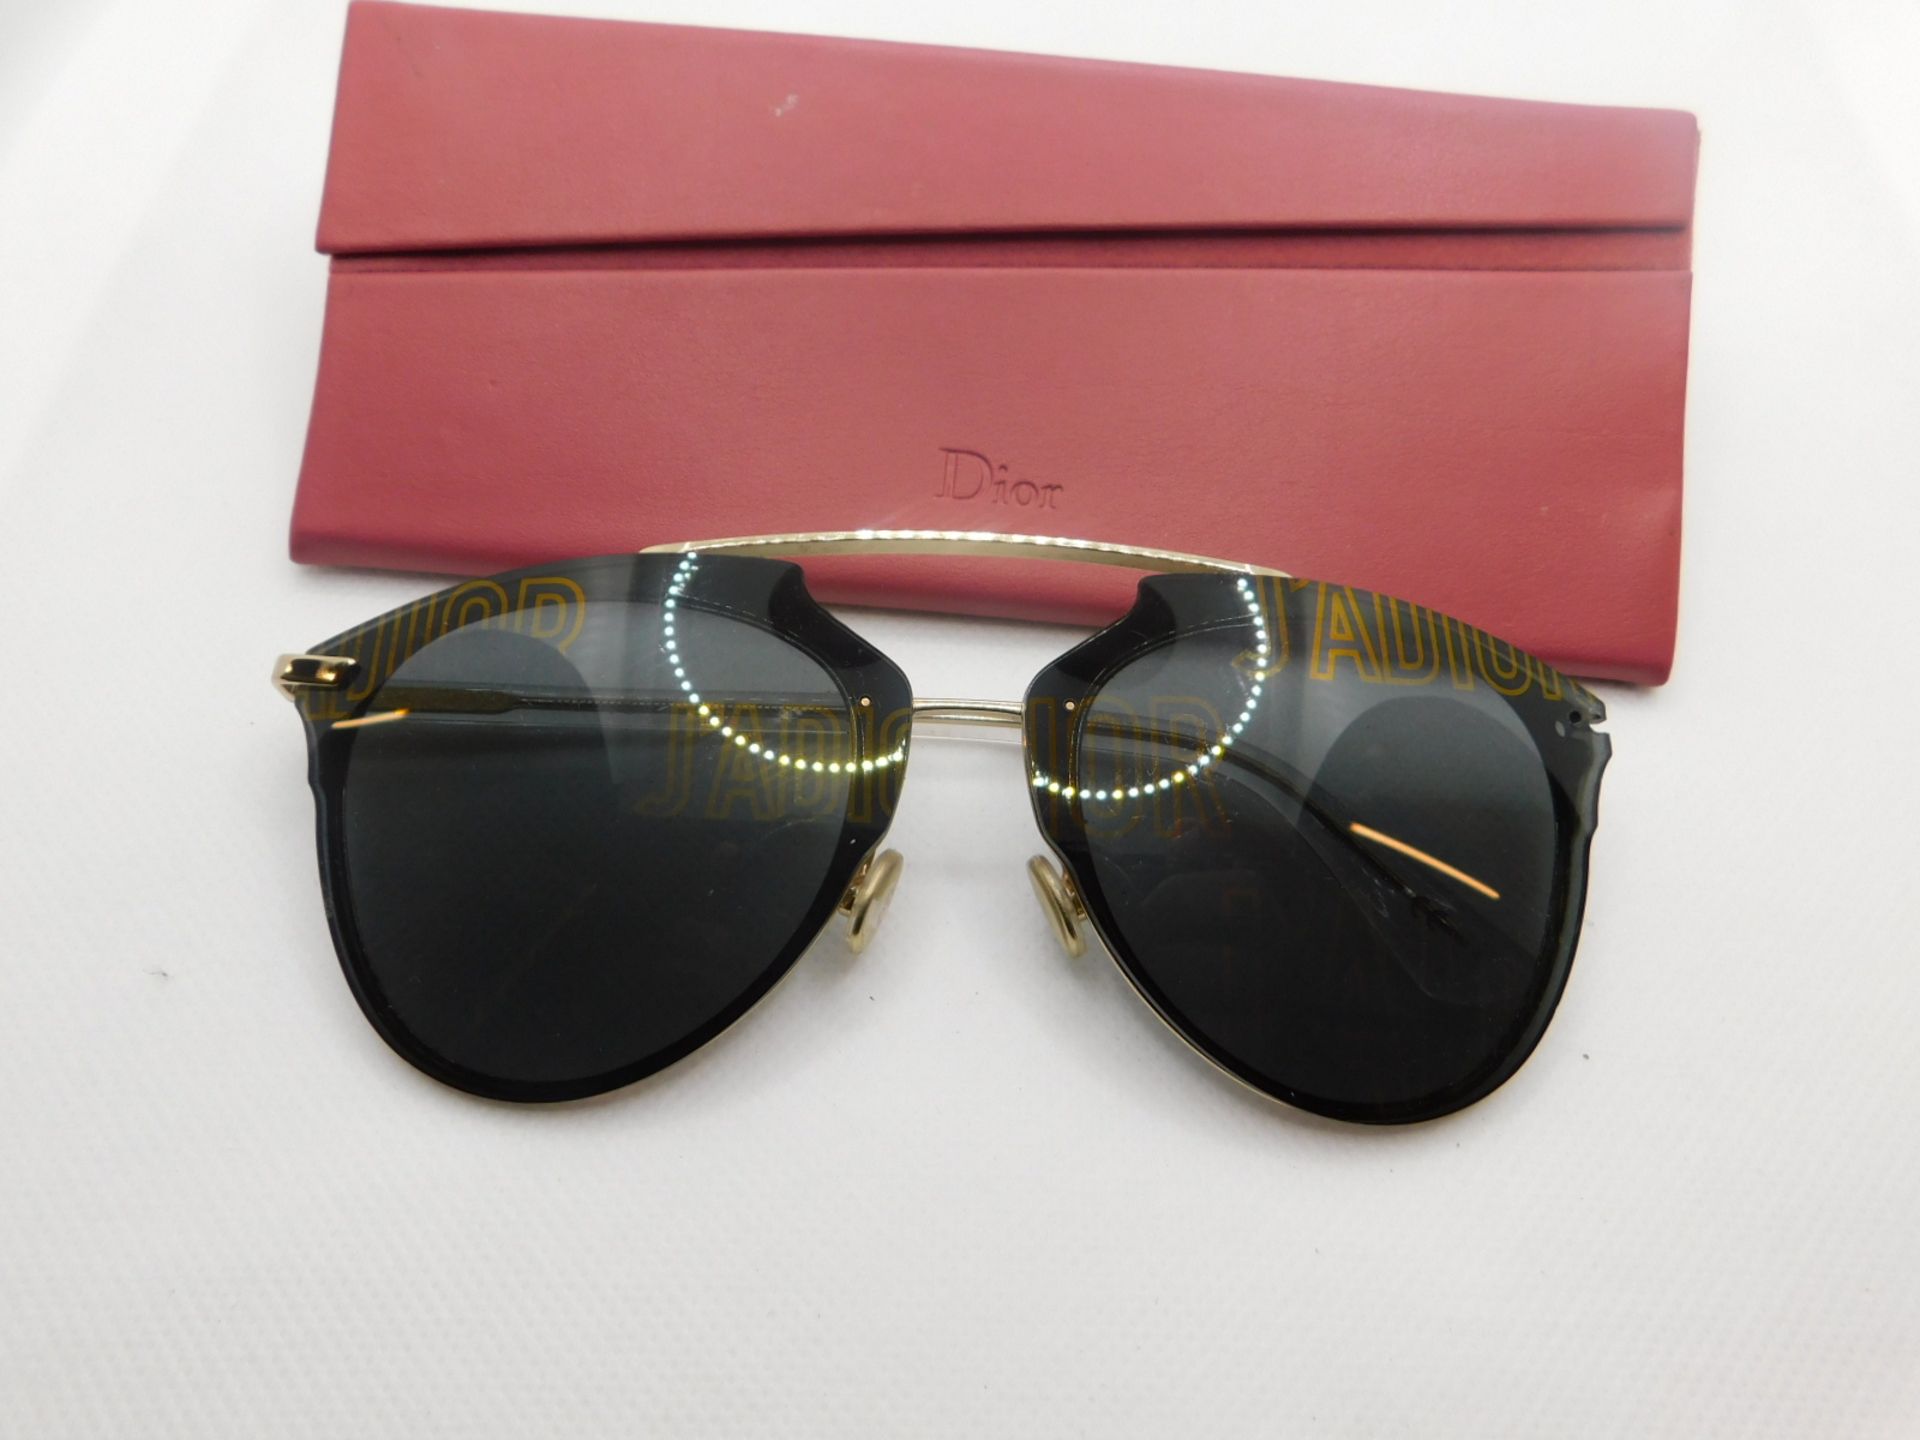 1 PAIR DIOR REFLECTED SUNGLASSES WITH CASE RRP Â£299 (MISSING 1 TEMPLE)